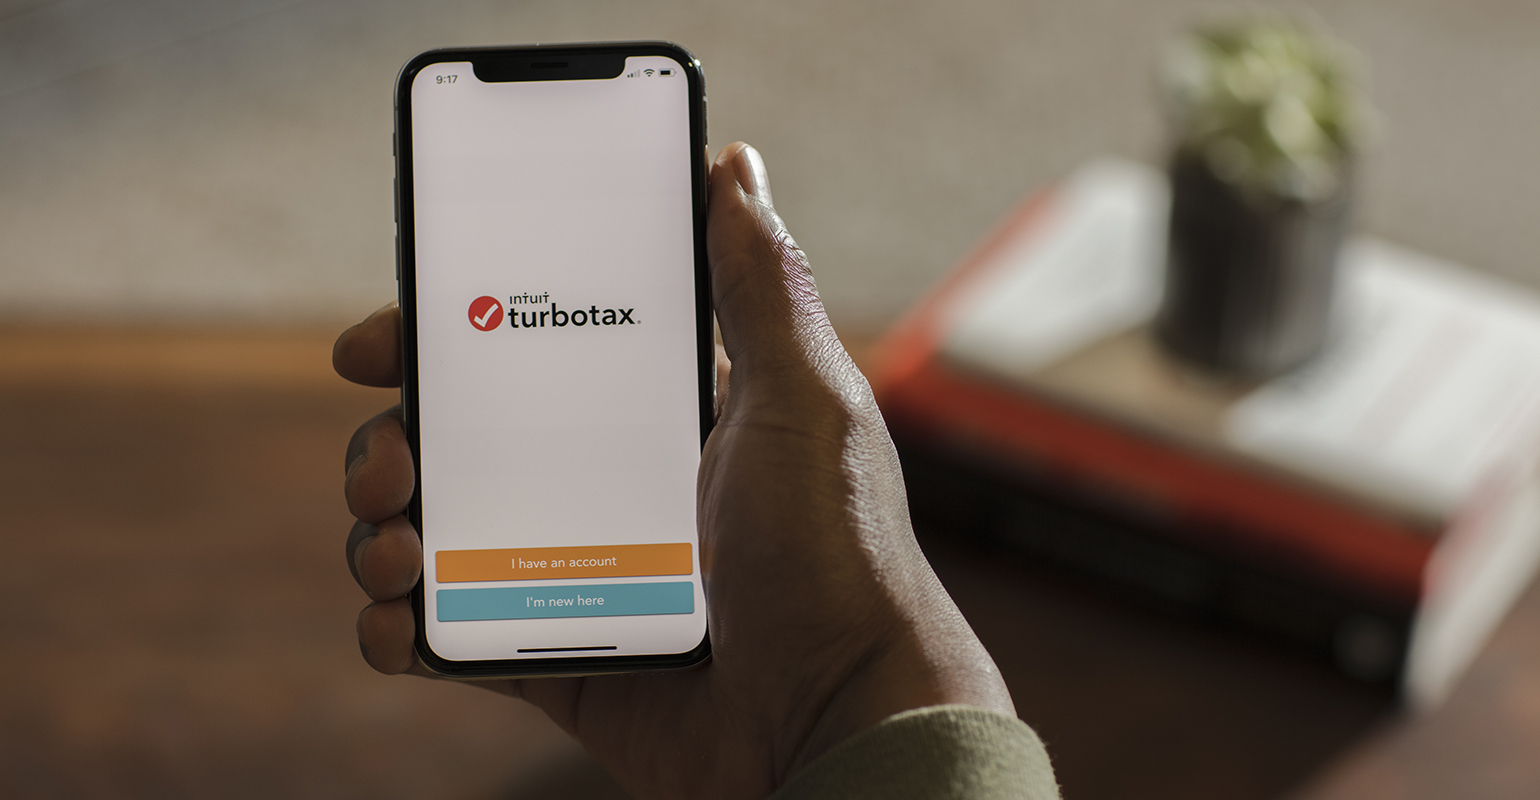 unable to log into turbotax app